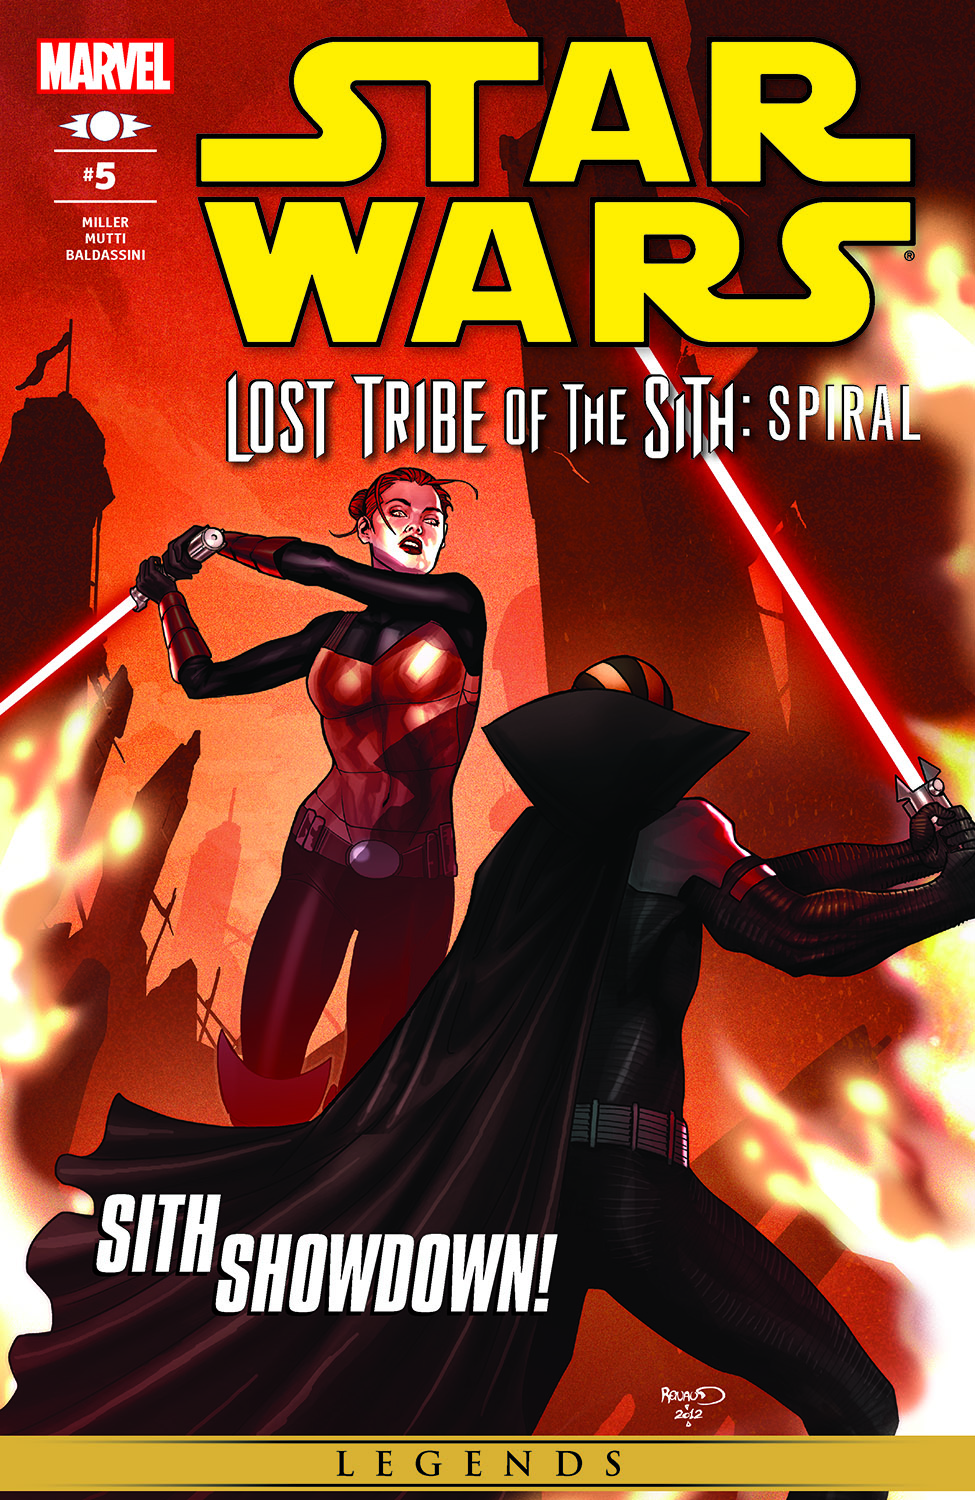 Star Wars: Lost Tribe of the Sith - Spiral (2012) #5